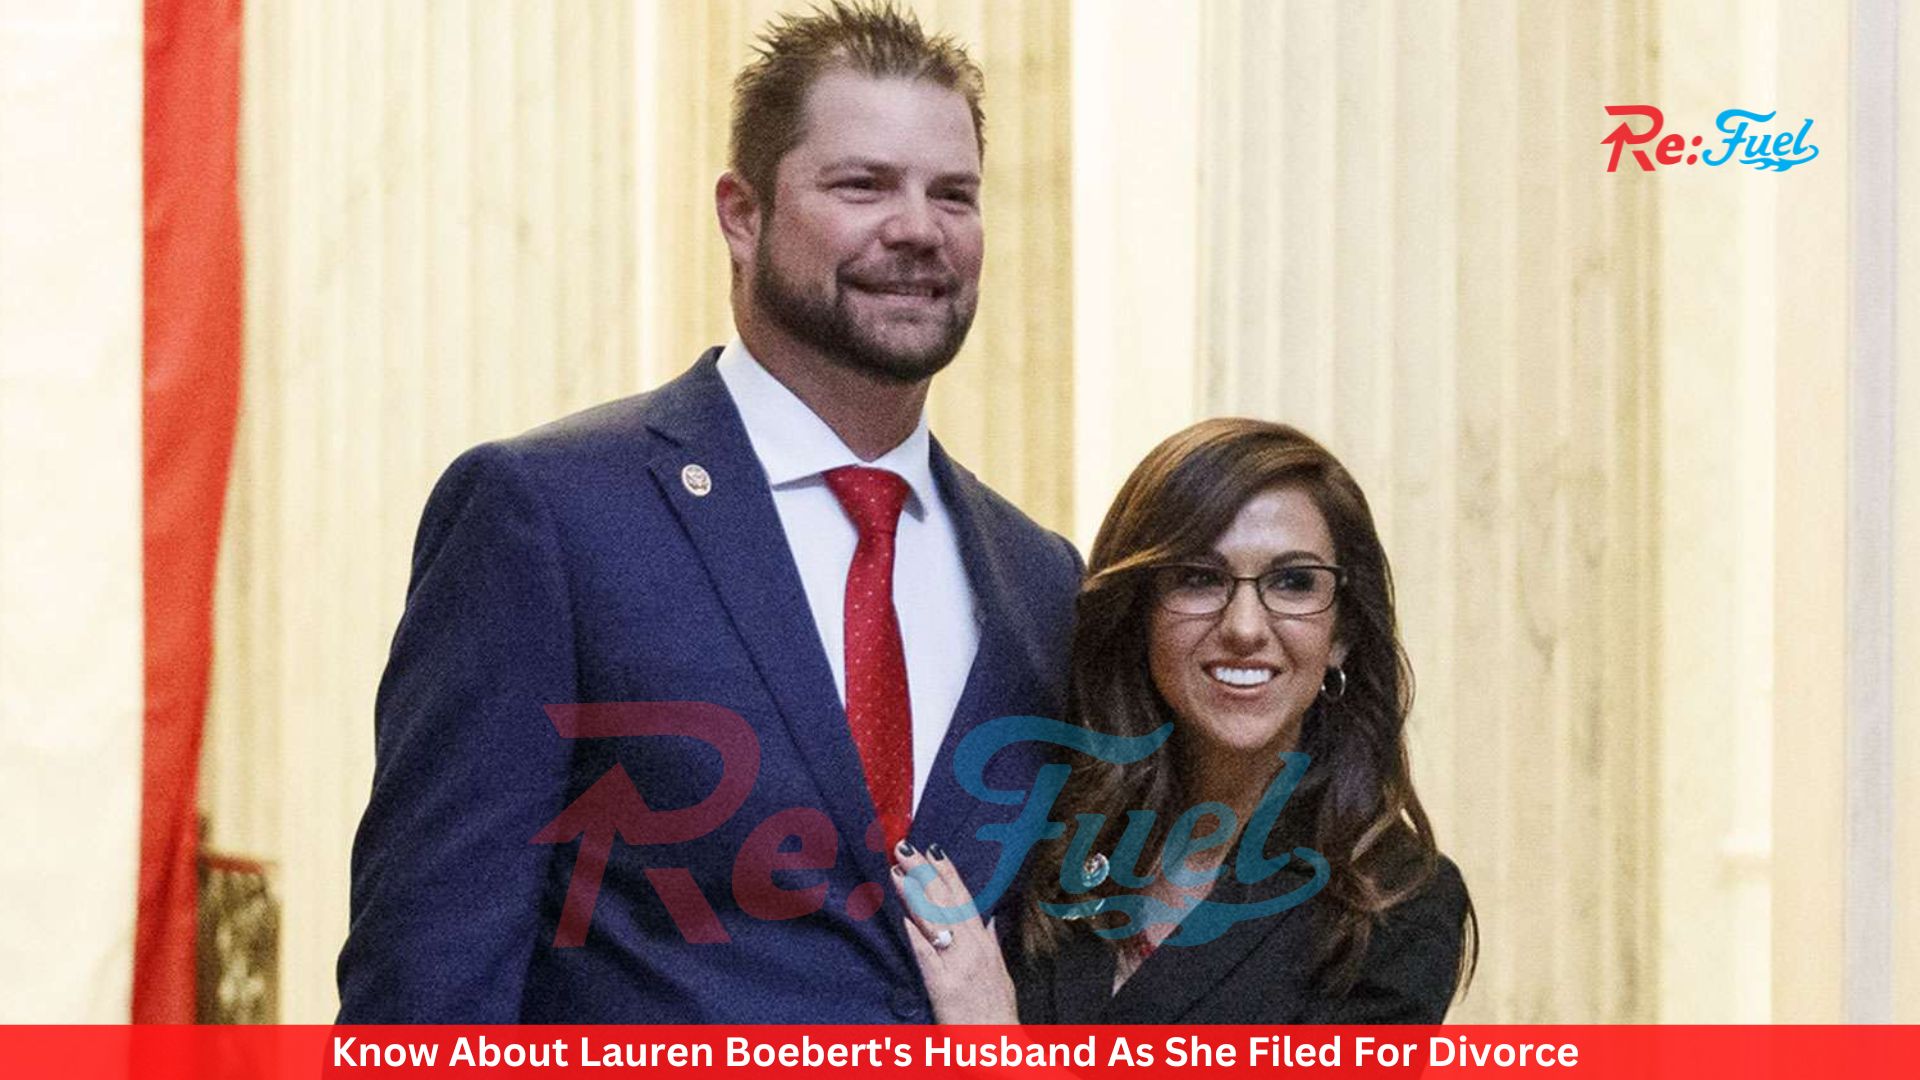 Know About Lauren Boebert's Husband As She Filed For Divorce